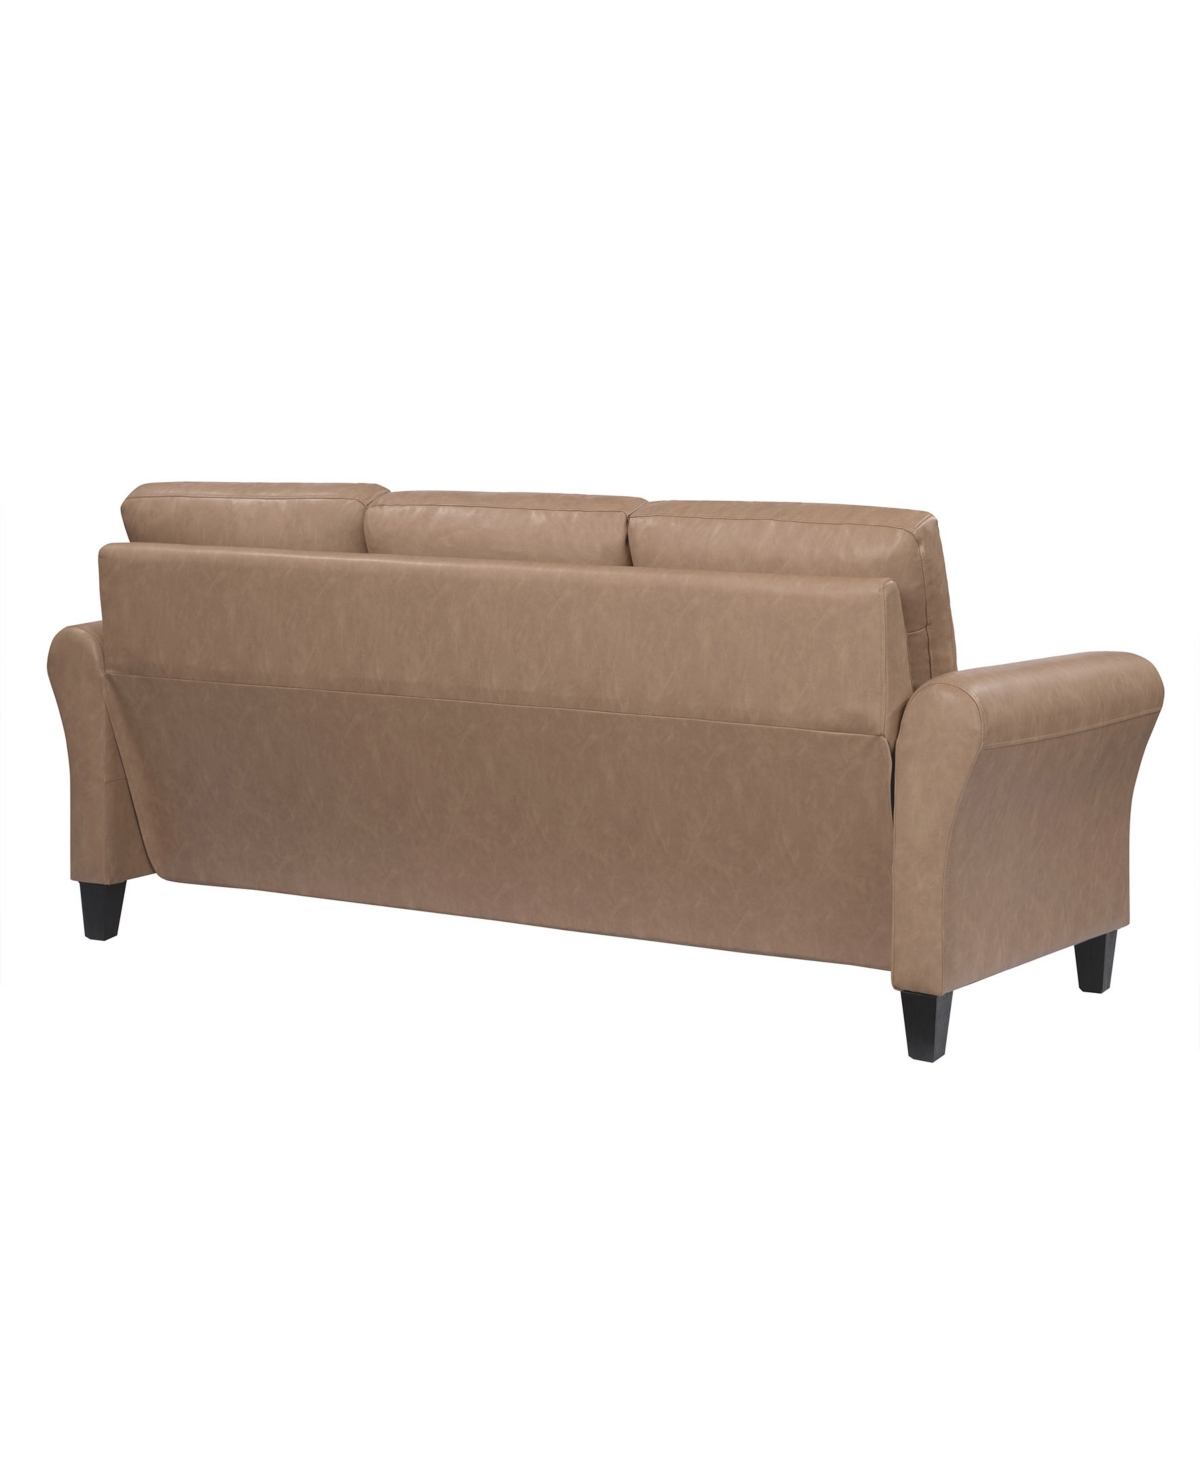 Shop Lifestyle Solutions 80.3" W Faux Leather Wilshire Sofa With Rolled Arms In Brown